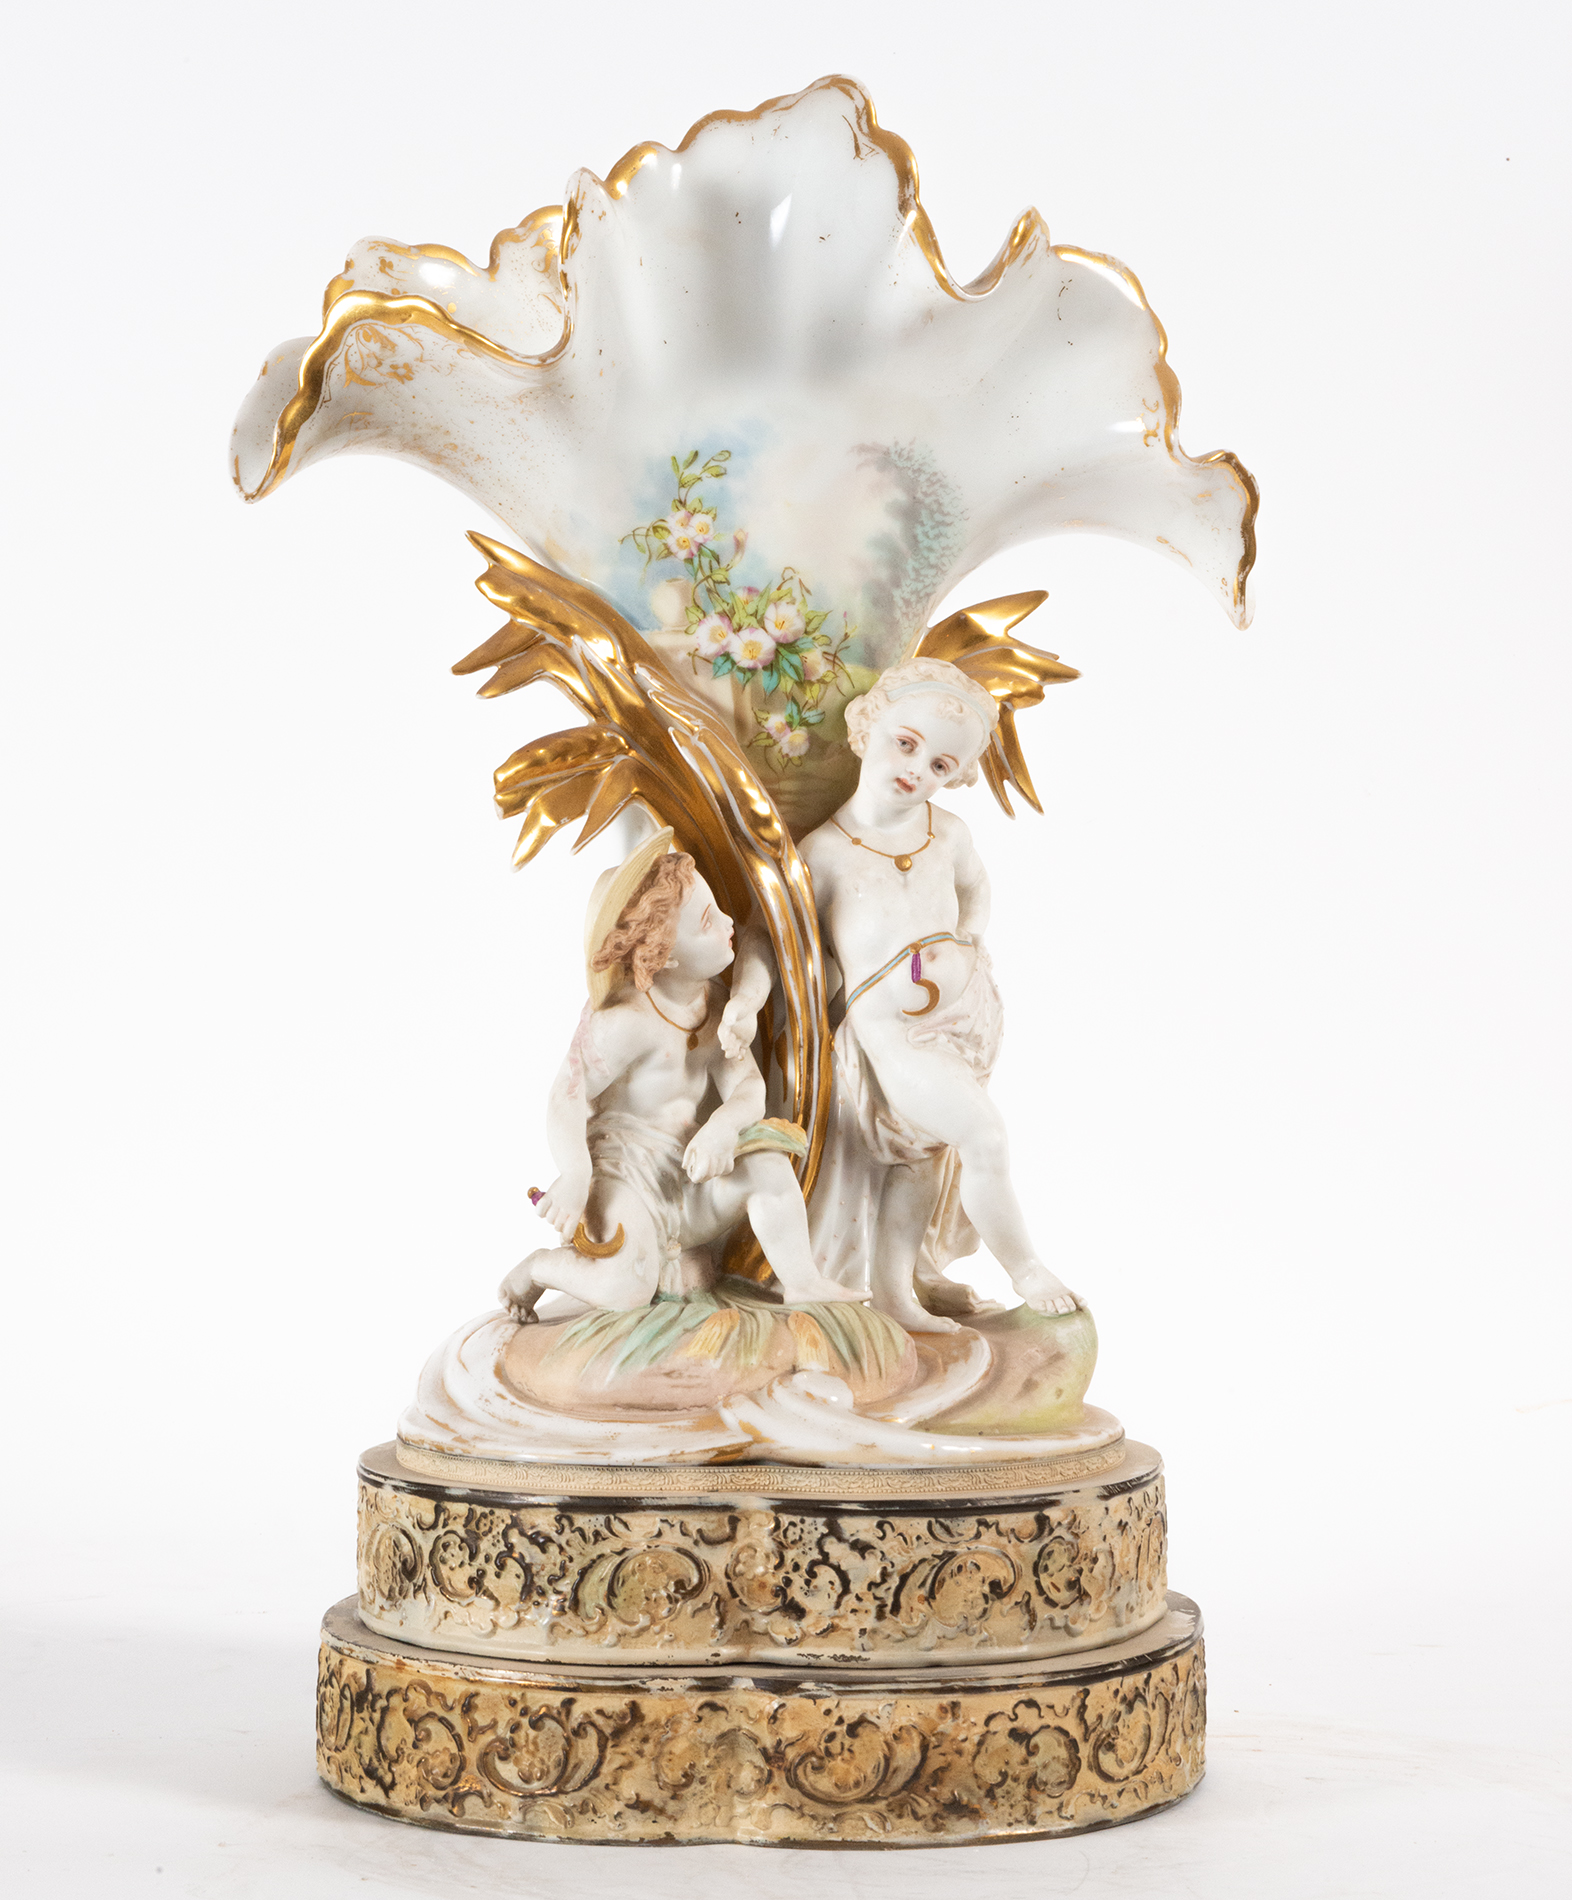 Pair of Vases with Little Shepherds in glazed biscuit porcelain, 19th century - Image 2 of 8